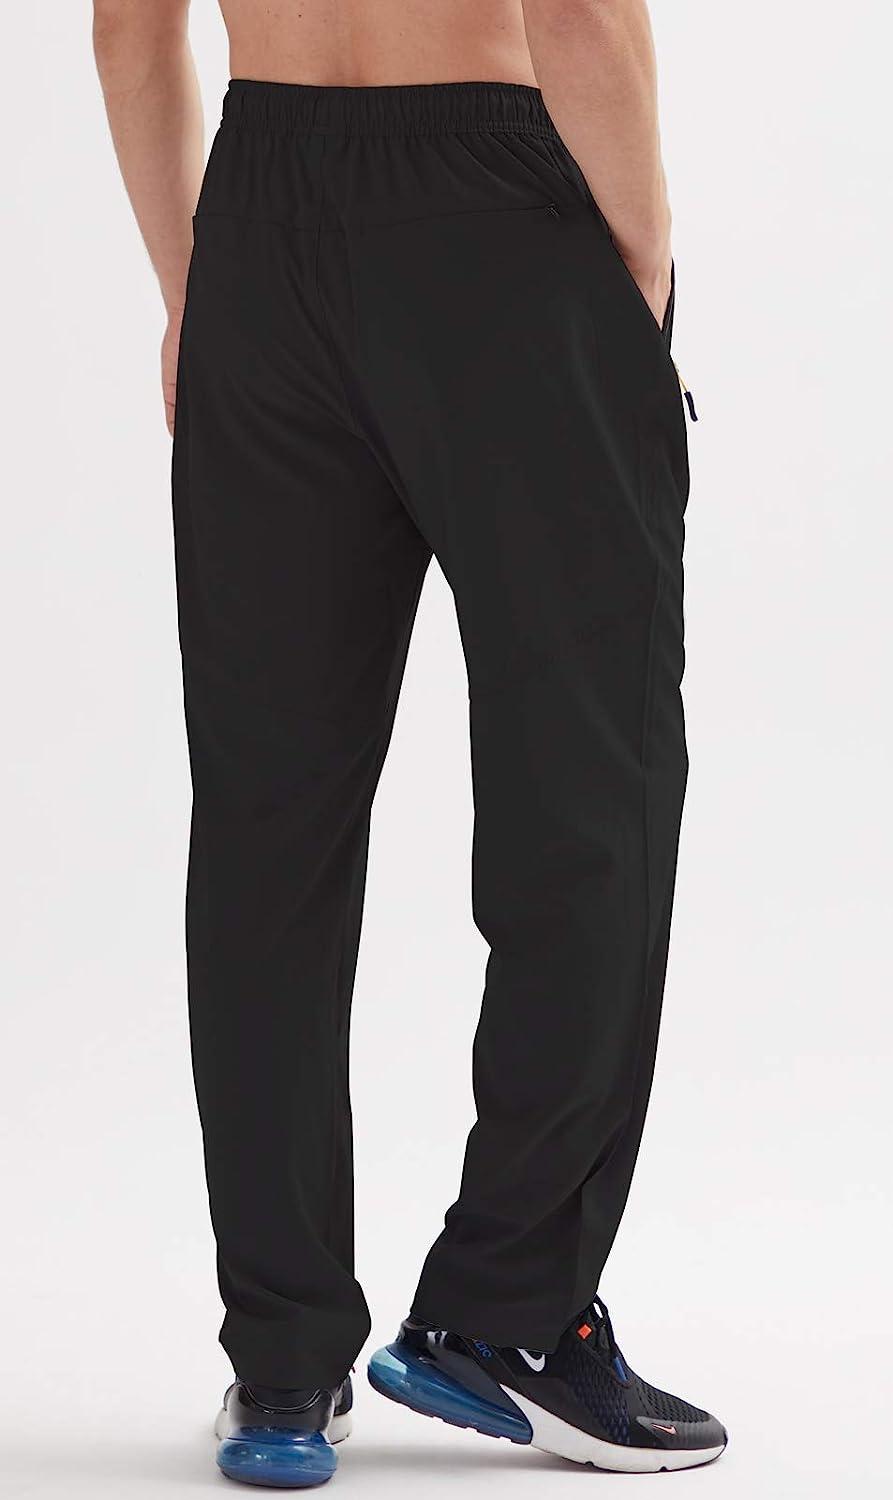 AIRIKE Mens Sweatpants with Pockets Quick Dry Water Resistant